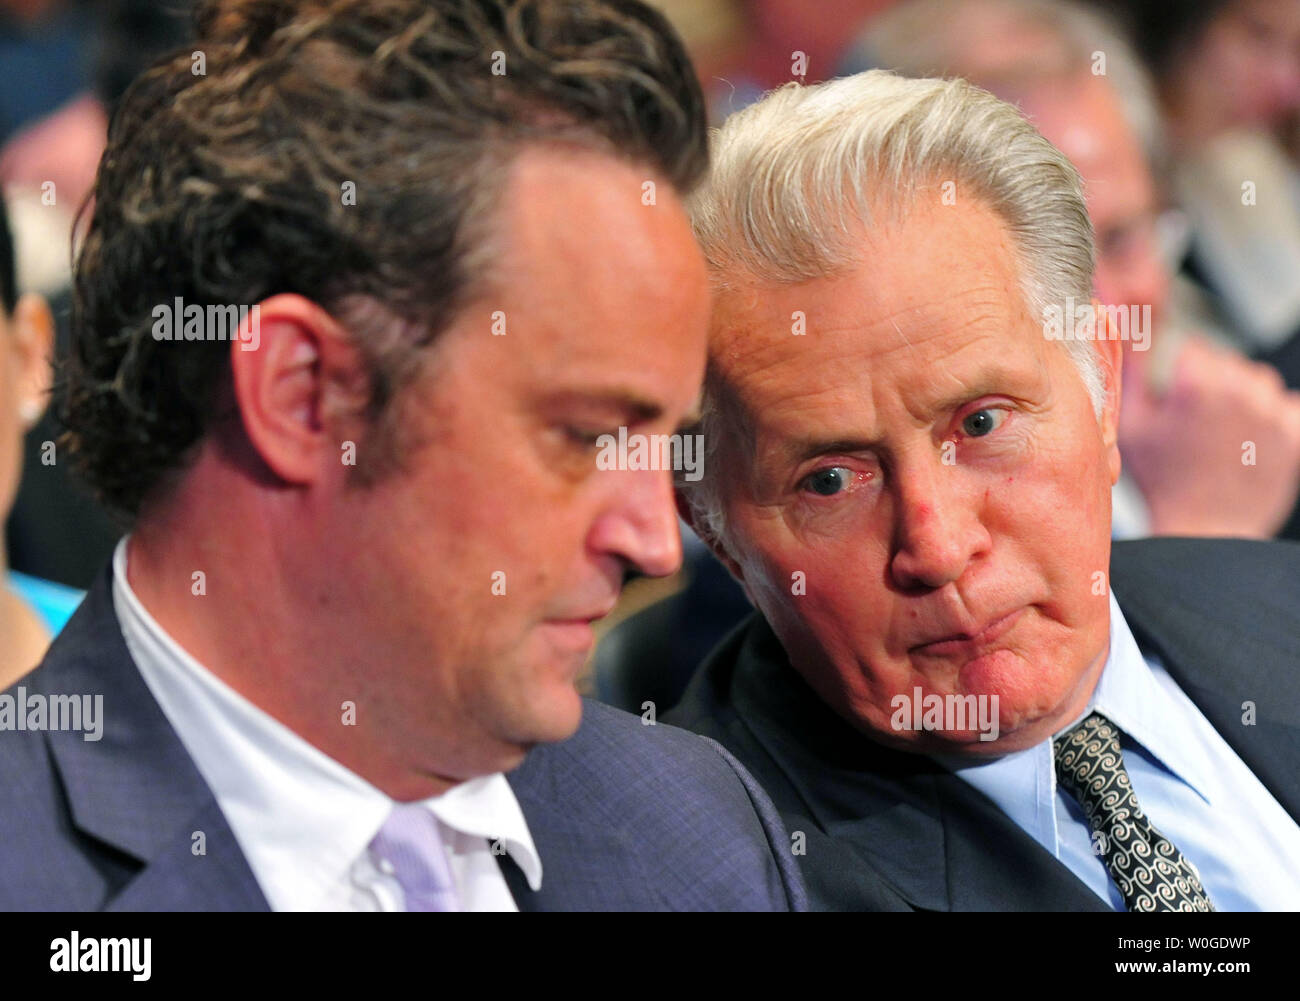 Actor Matthew Perry talks to actor Martin Sheen during a Senate Judiciary Committee Crime and Judiciary Subcommittee hearing titled 'Drug and Veterans Treatment Courts: Seeking Cost-Effective Solutions for Protecting Public Safety and Reducing Recidivism,' on Capitol Hill in Washington, D.C. on July 19, 2011.  UPI/Kevin Dietsch Stock Photo